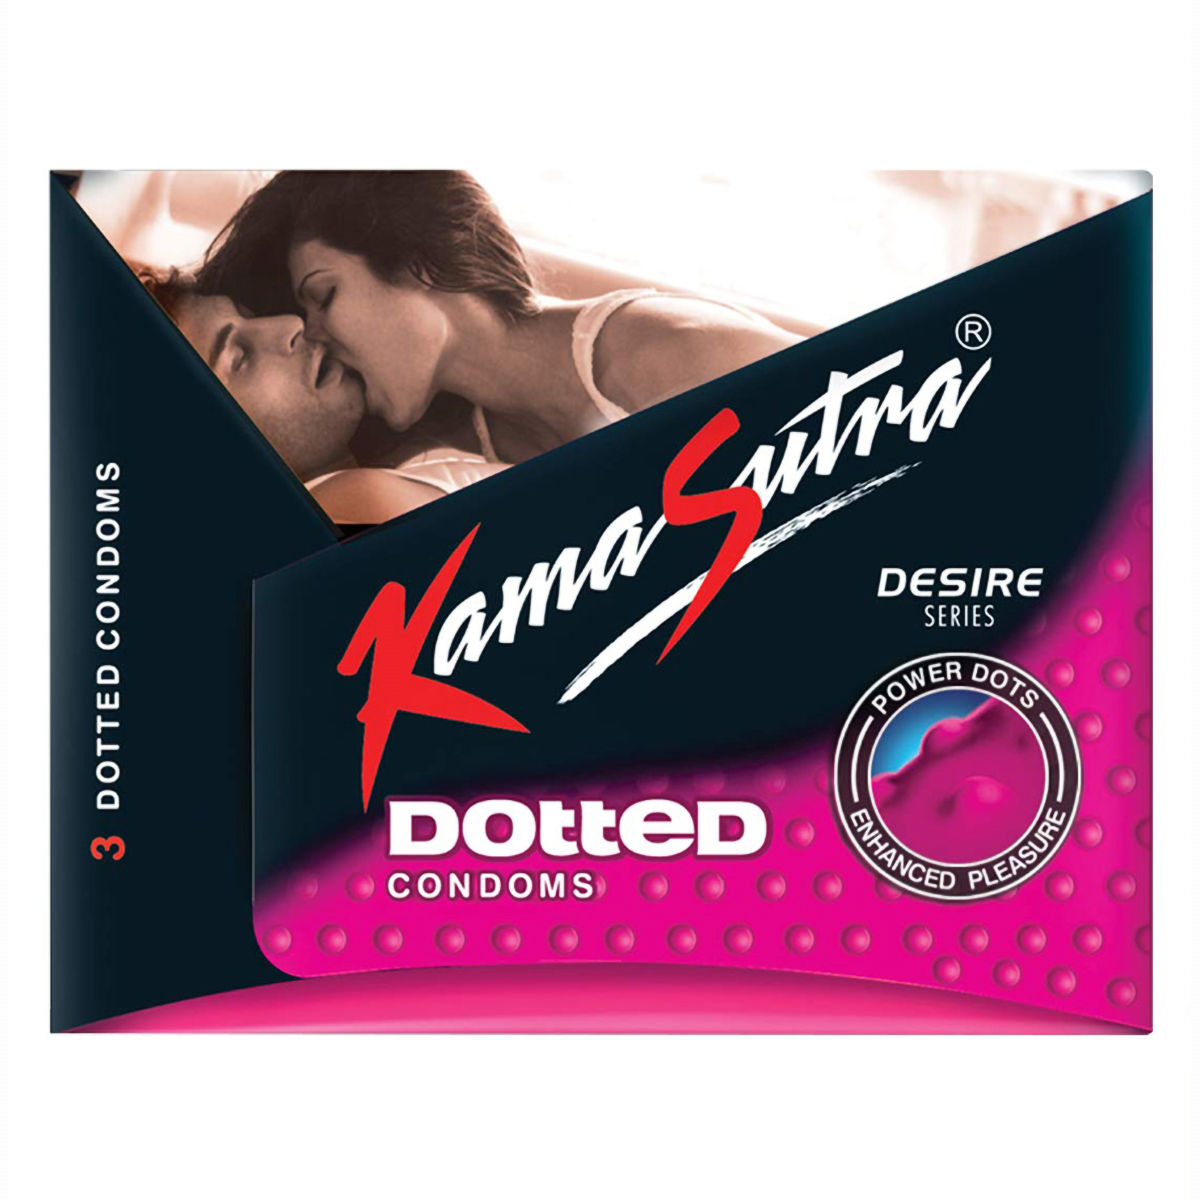 Buy Kamasutra Dotted Condoms, 3 Count Online